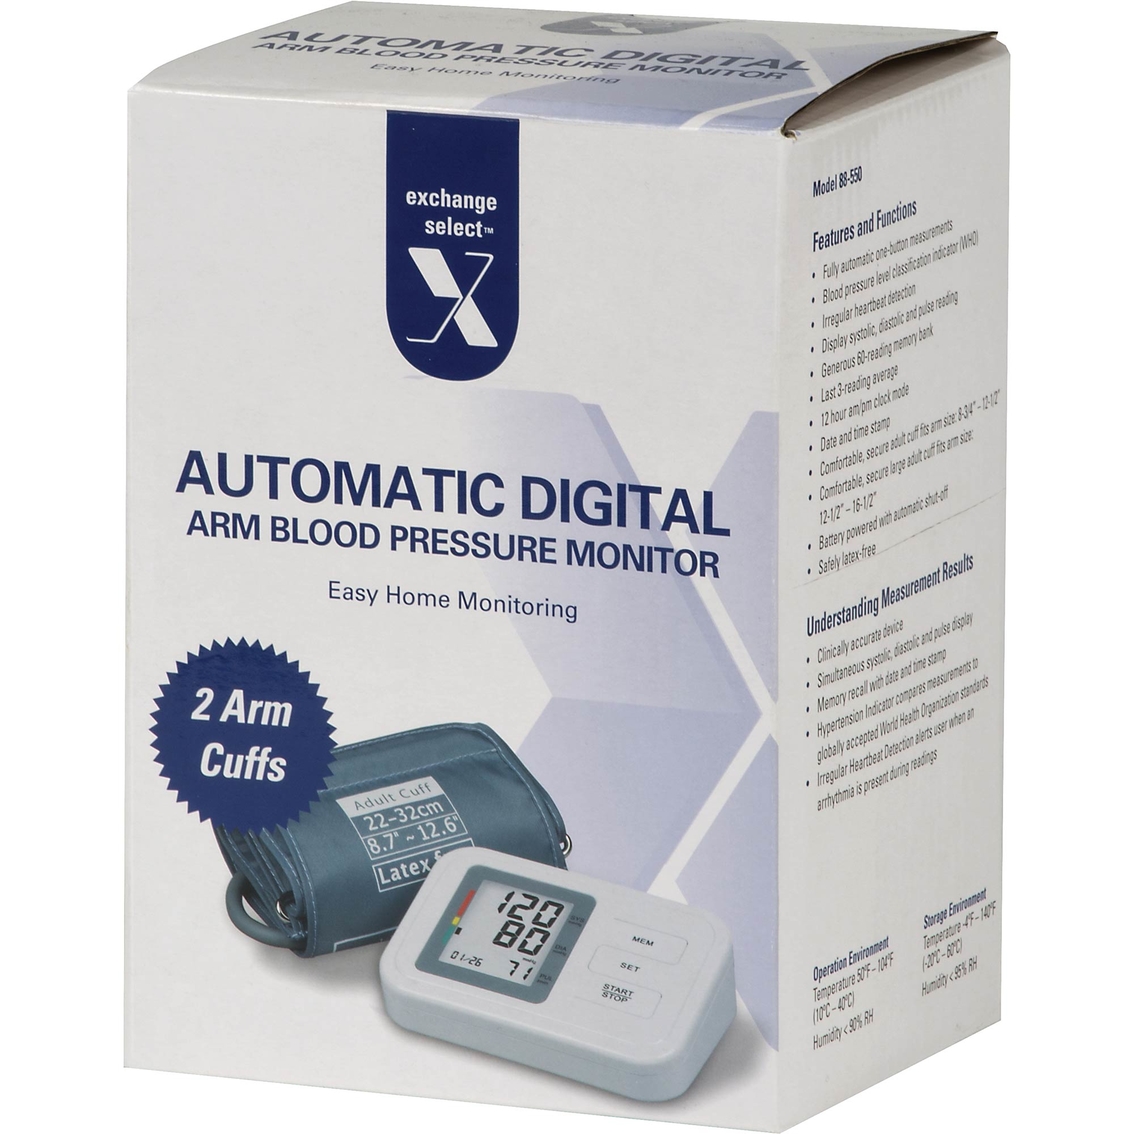 Exchange Select Automatic Digital Arm Blood Pressure Monitor - Image 3 of 3